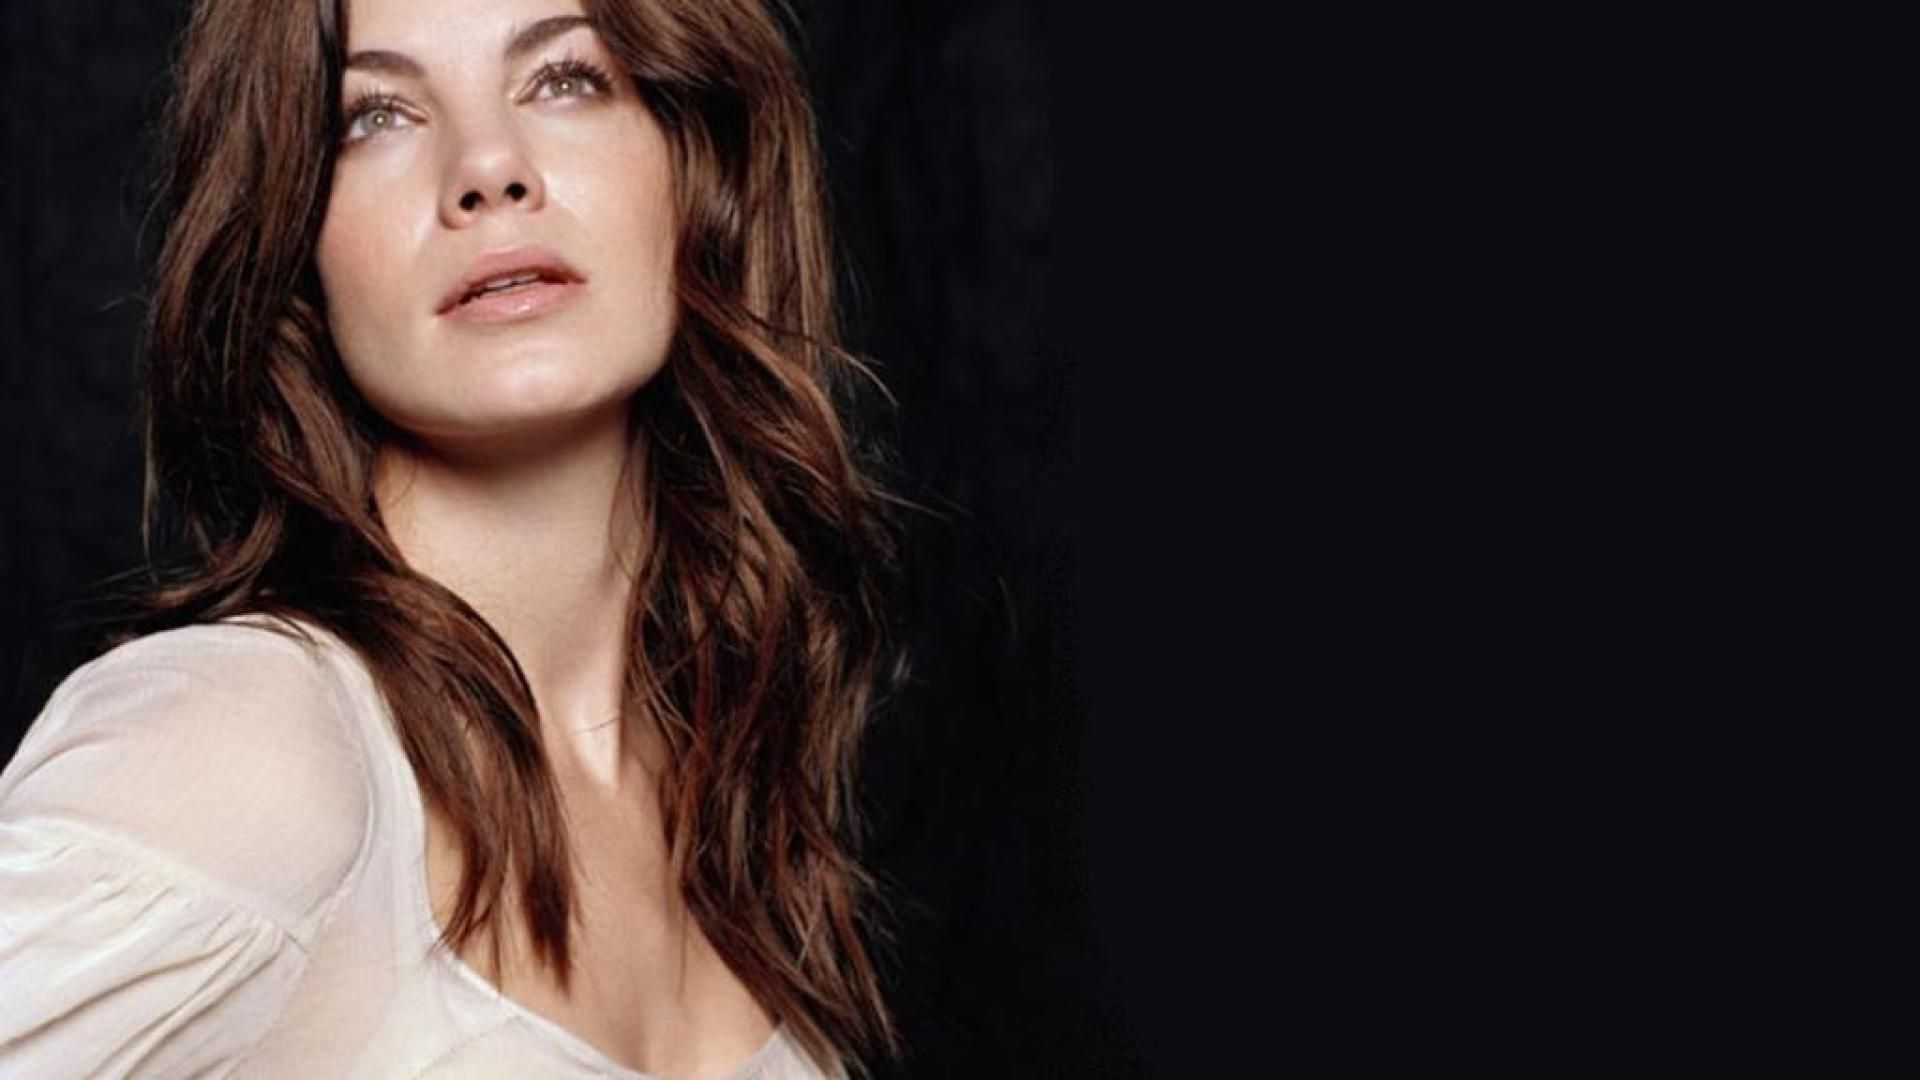 Michelle monaghan - - High Quality and Resolution